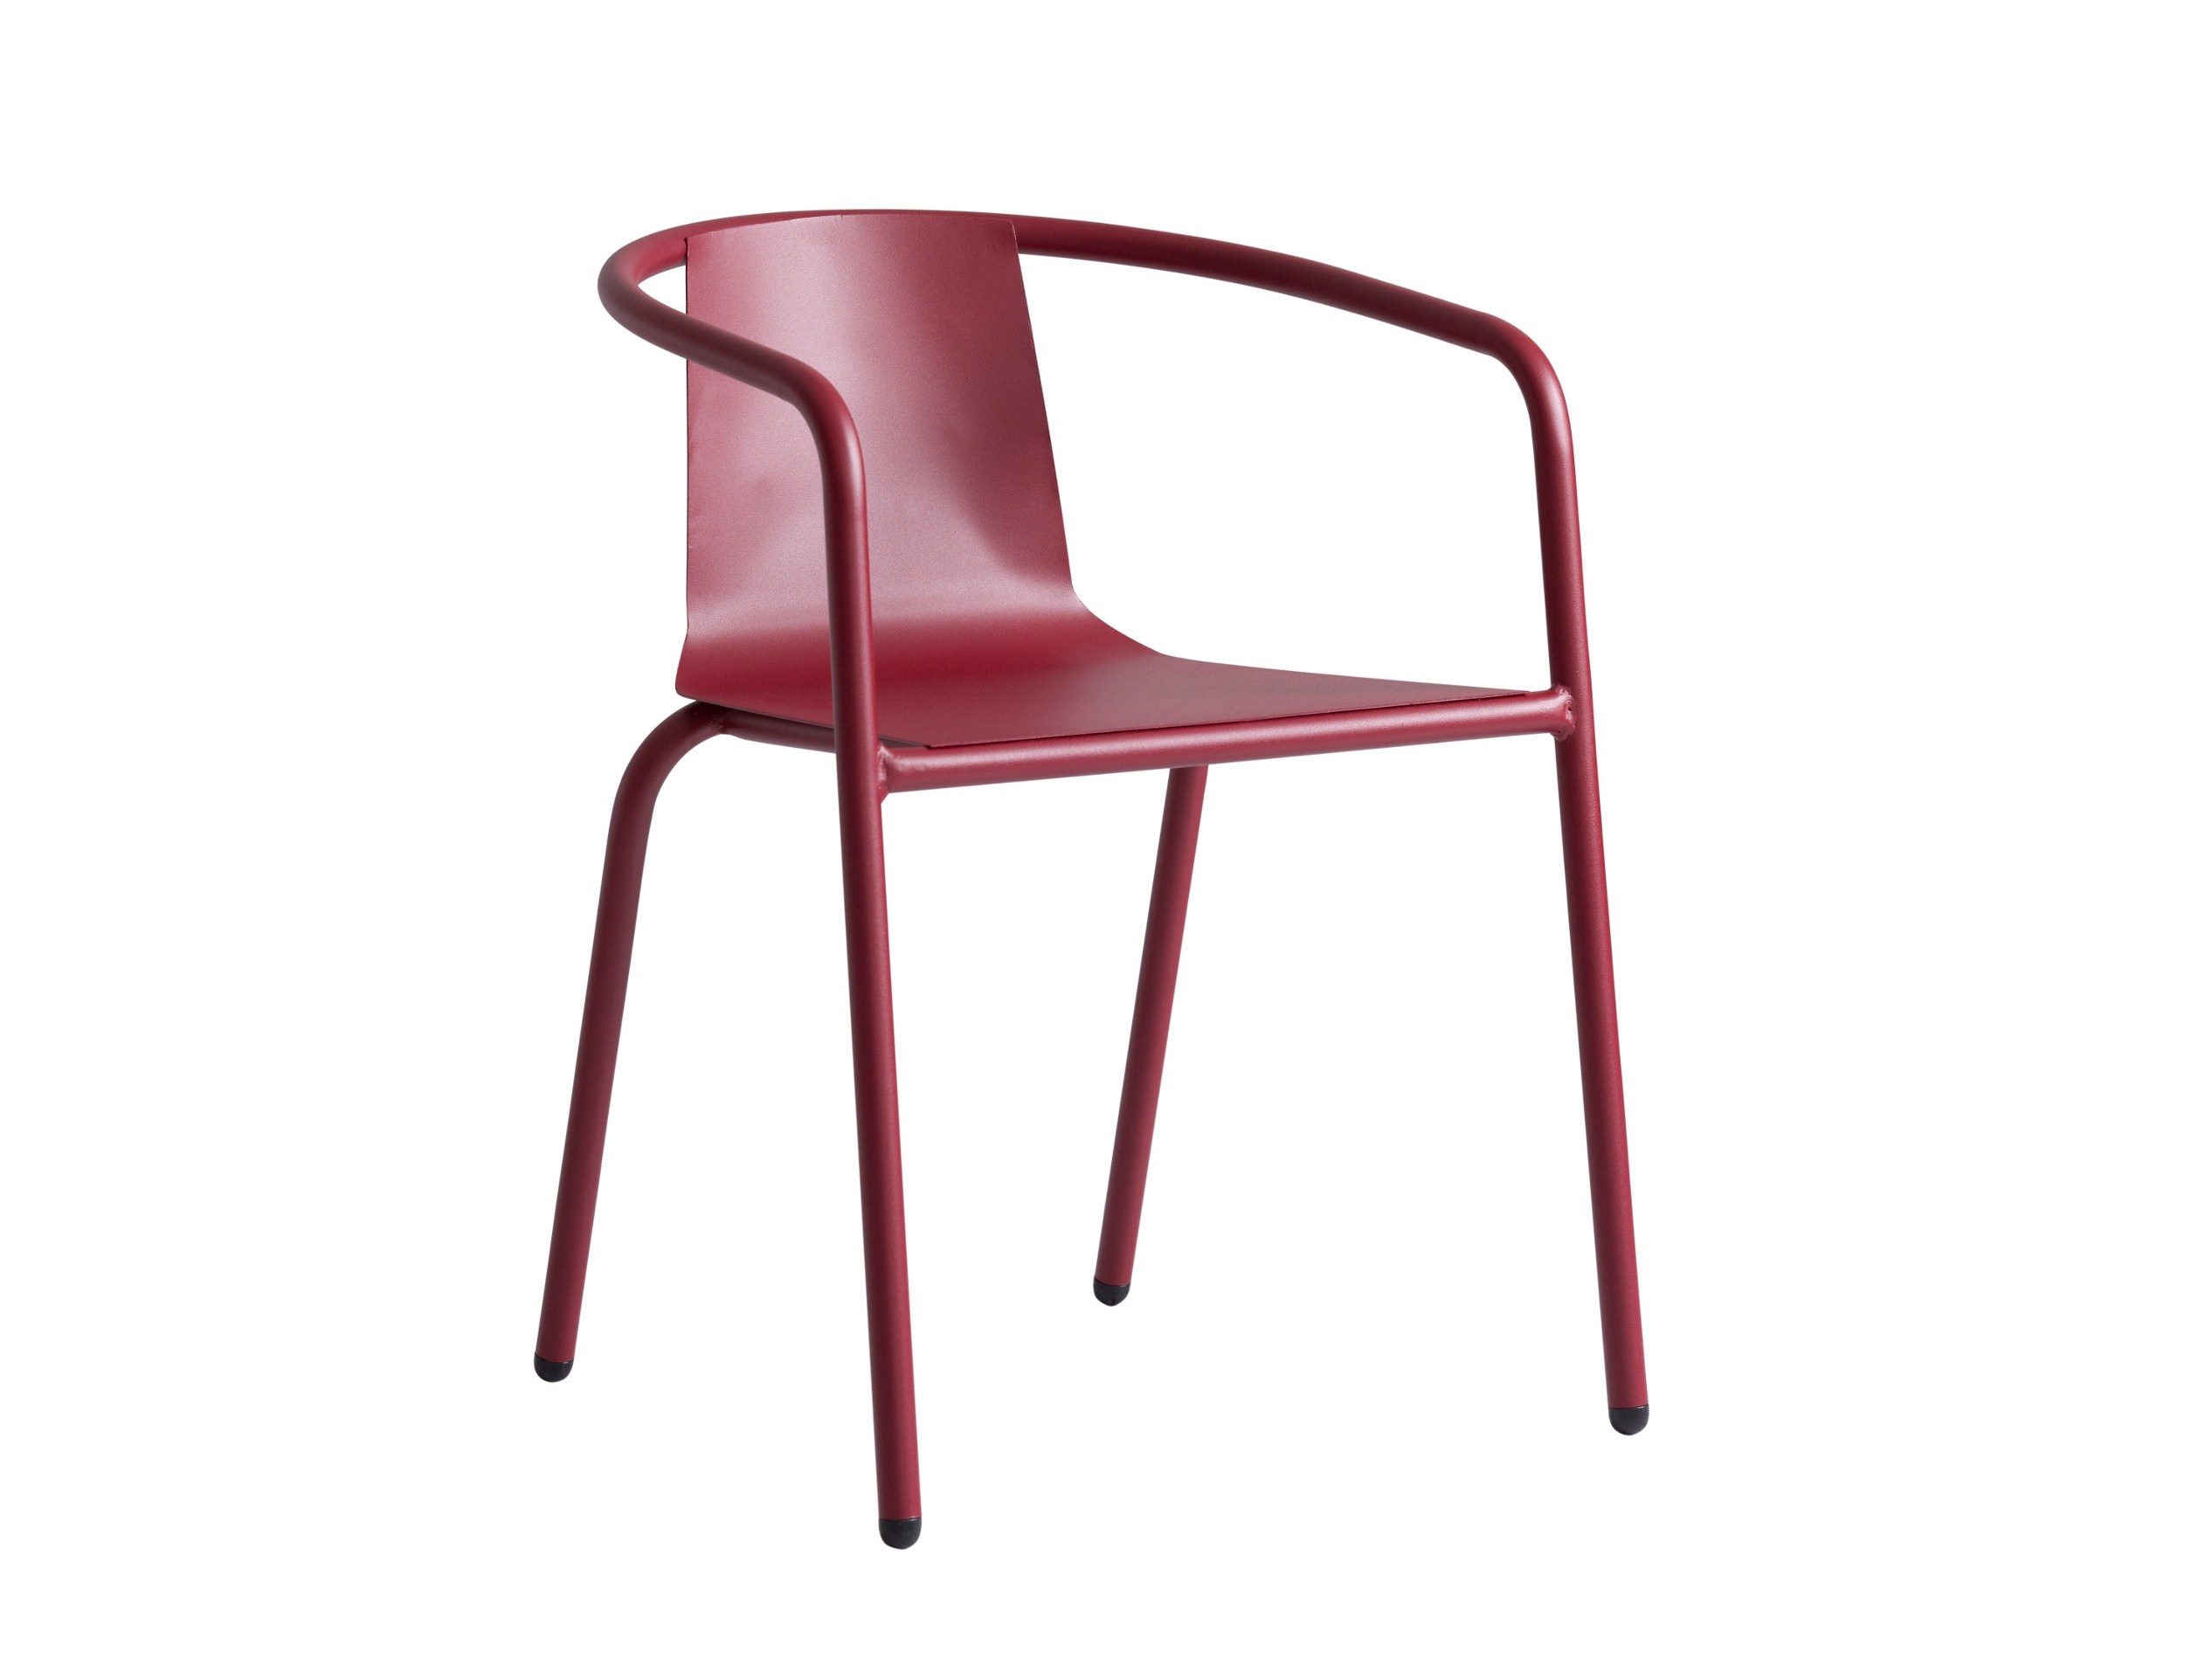 The CADIZ chair, a modern tribute to traditional bistro chairs